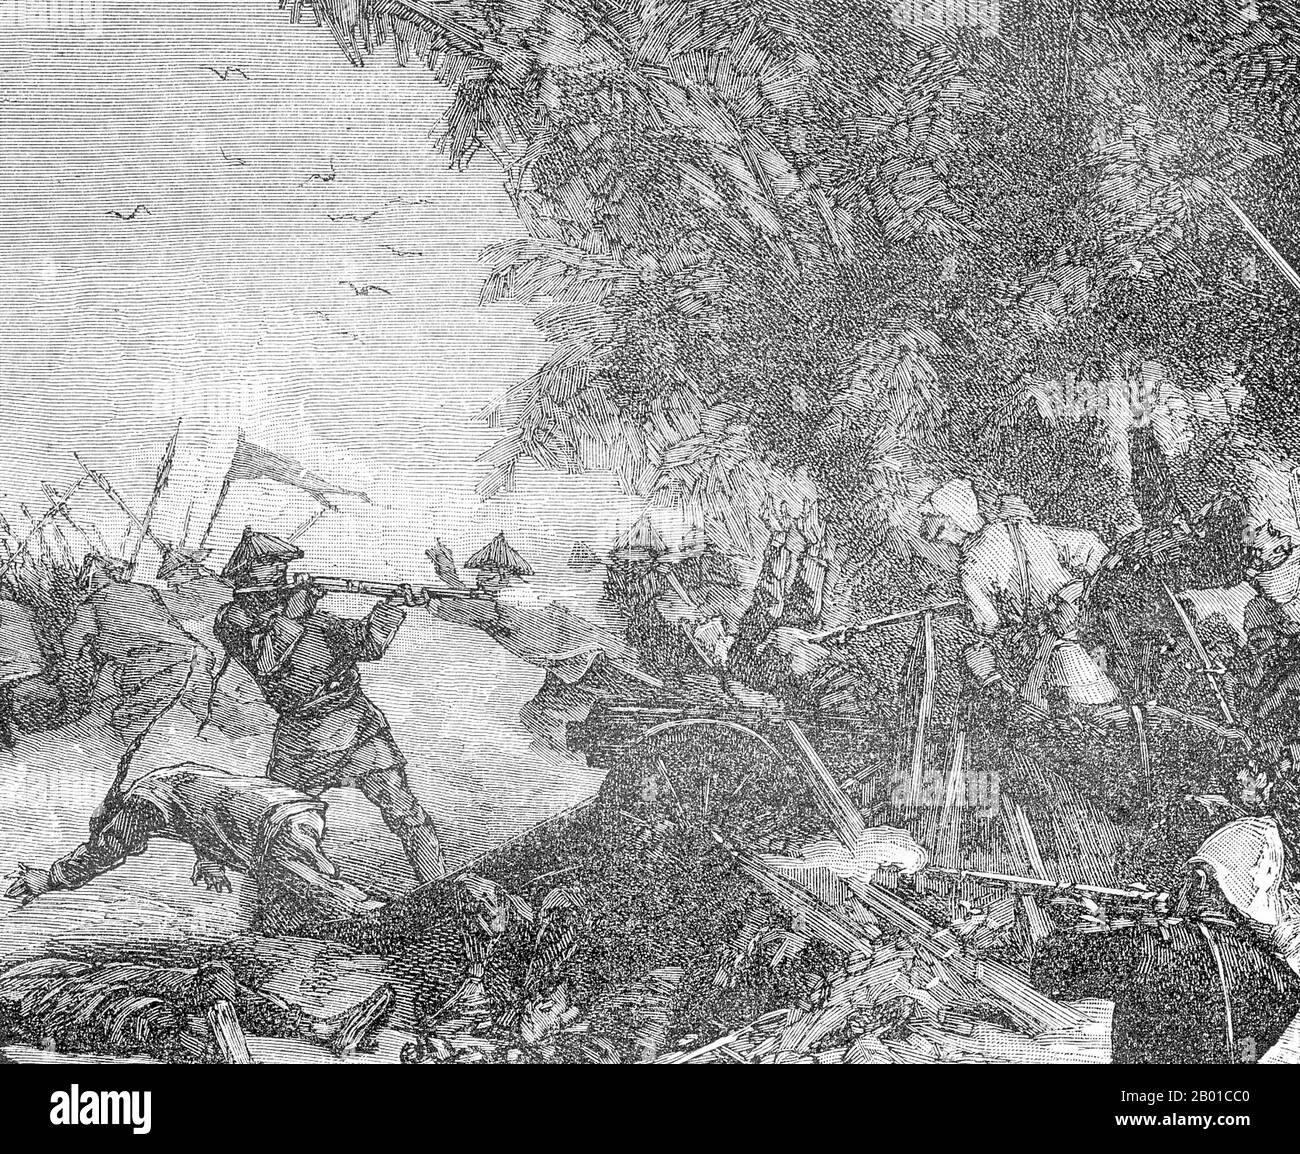 Vietnam: French infantry capture a Chinese fort during the battle of Nui Bop, 4 January 1885. Engraving by Charles-Lucien Huard (12 February 1837 - 22 January 1899), 1887.  The Tonkin Campaign (French: Campagne du Tonkin) was an armed conflict fought between June 1883 and April 1886 by the French against, variously, the Vietnamese, Liu Yongfu's Black Flag Army and the Chinese Guangxi and Yunnan armies to occupy Tonkin (northern Vietnam) and entrench a French protectorate there. Stock Photo